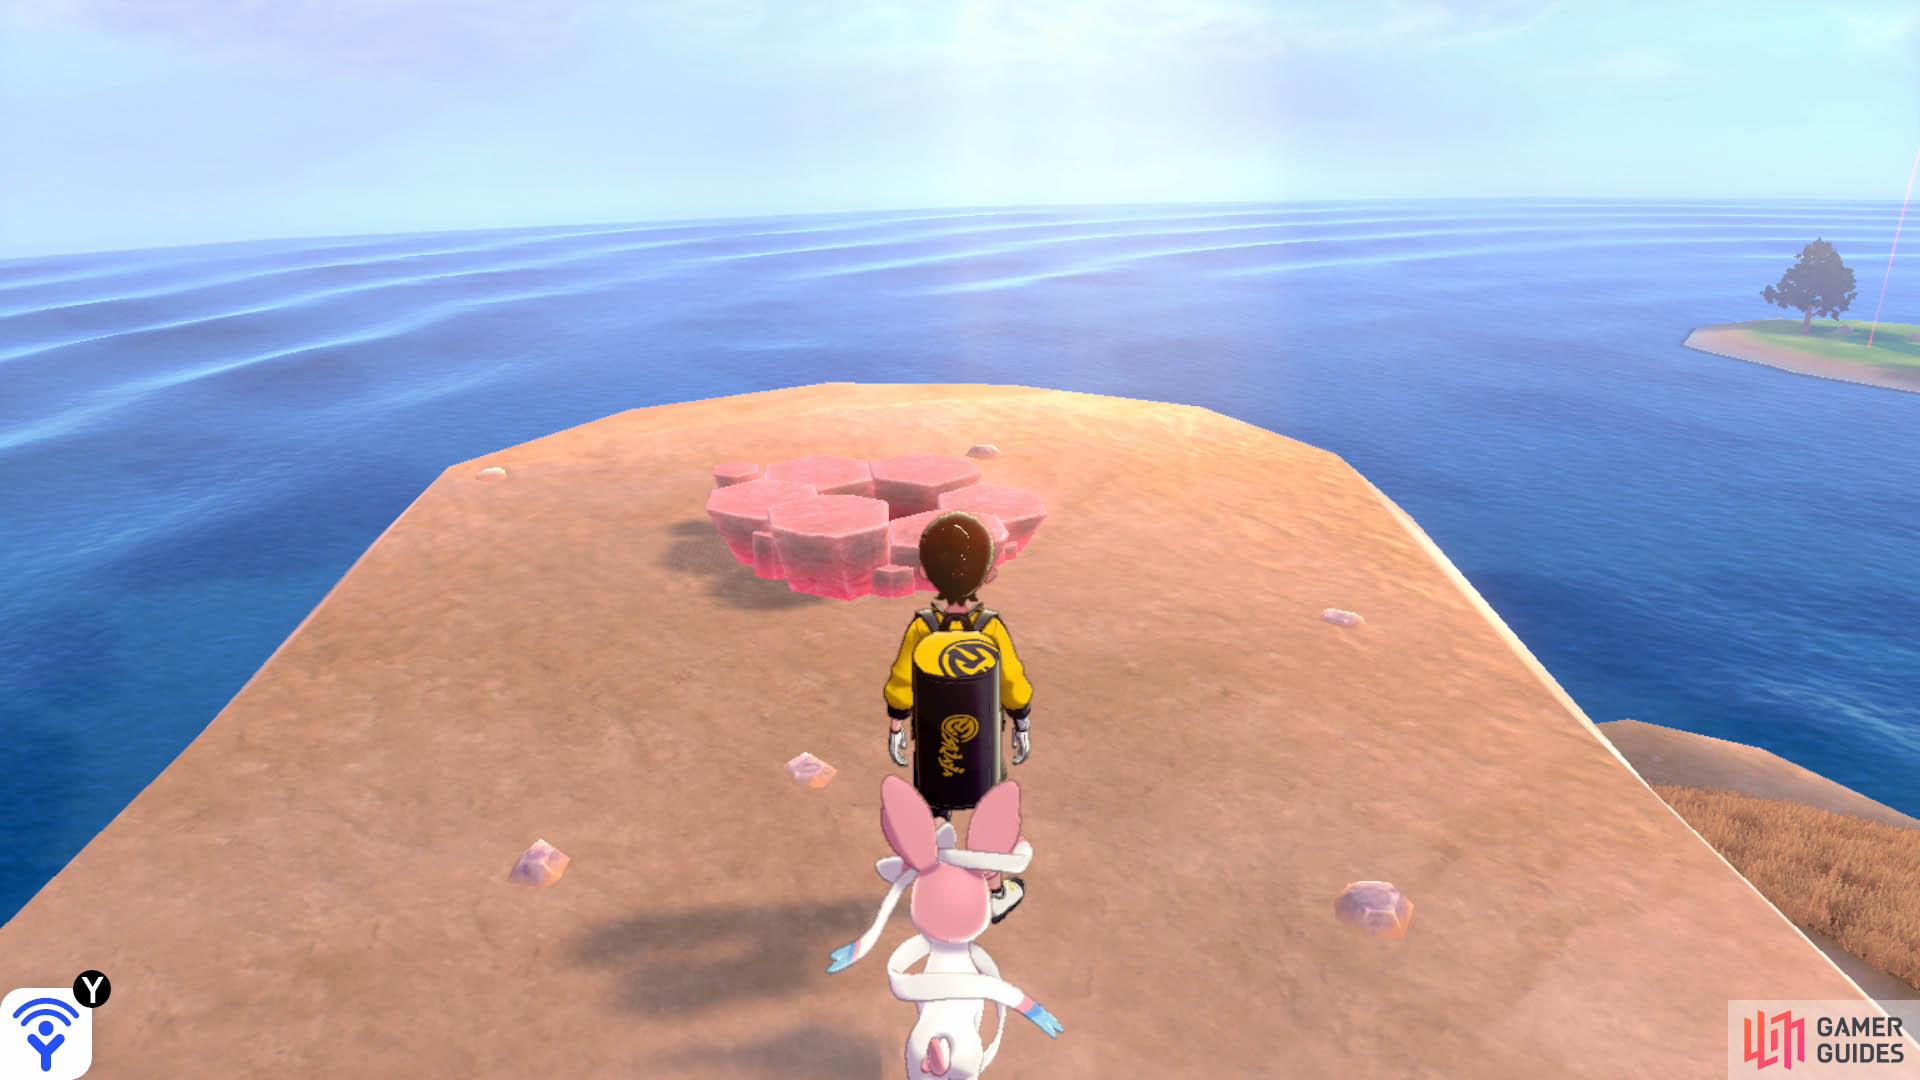 At the second crossroad, turn right while facing the stairs to the tower. At the edge of the plateau, overlooking the ocean. There are pebbles nearby.